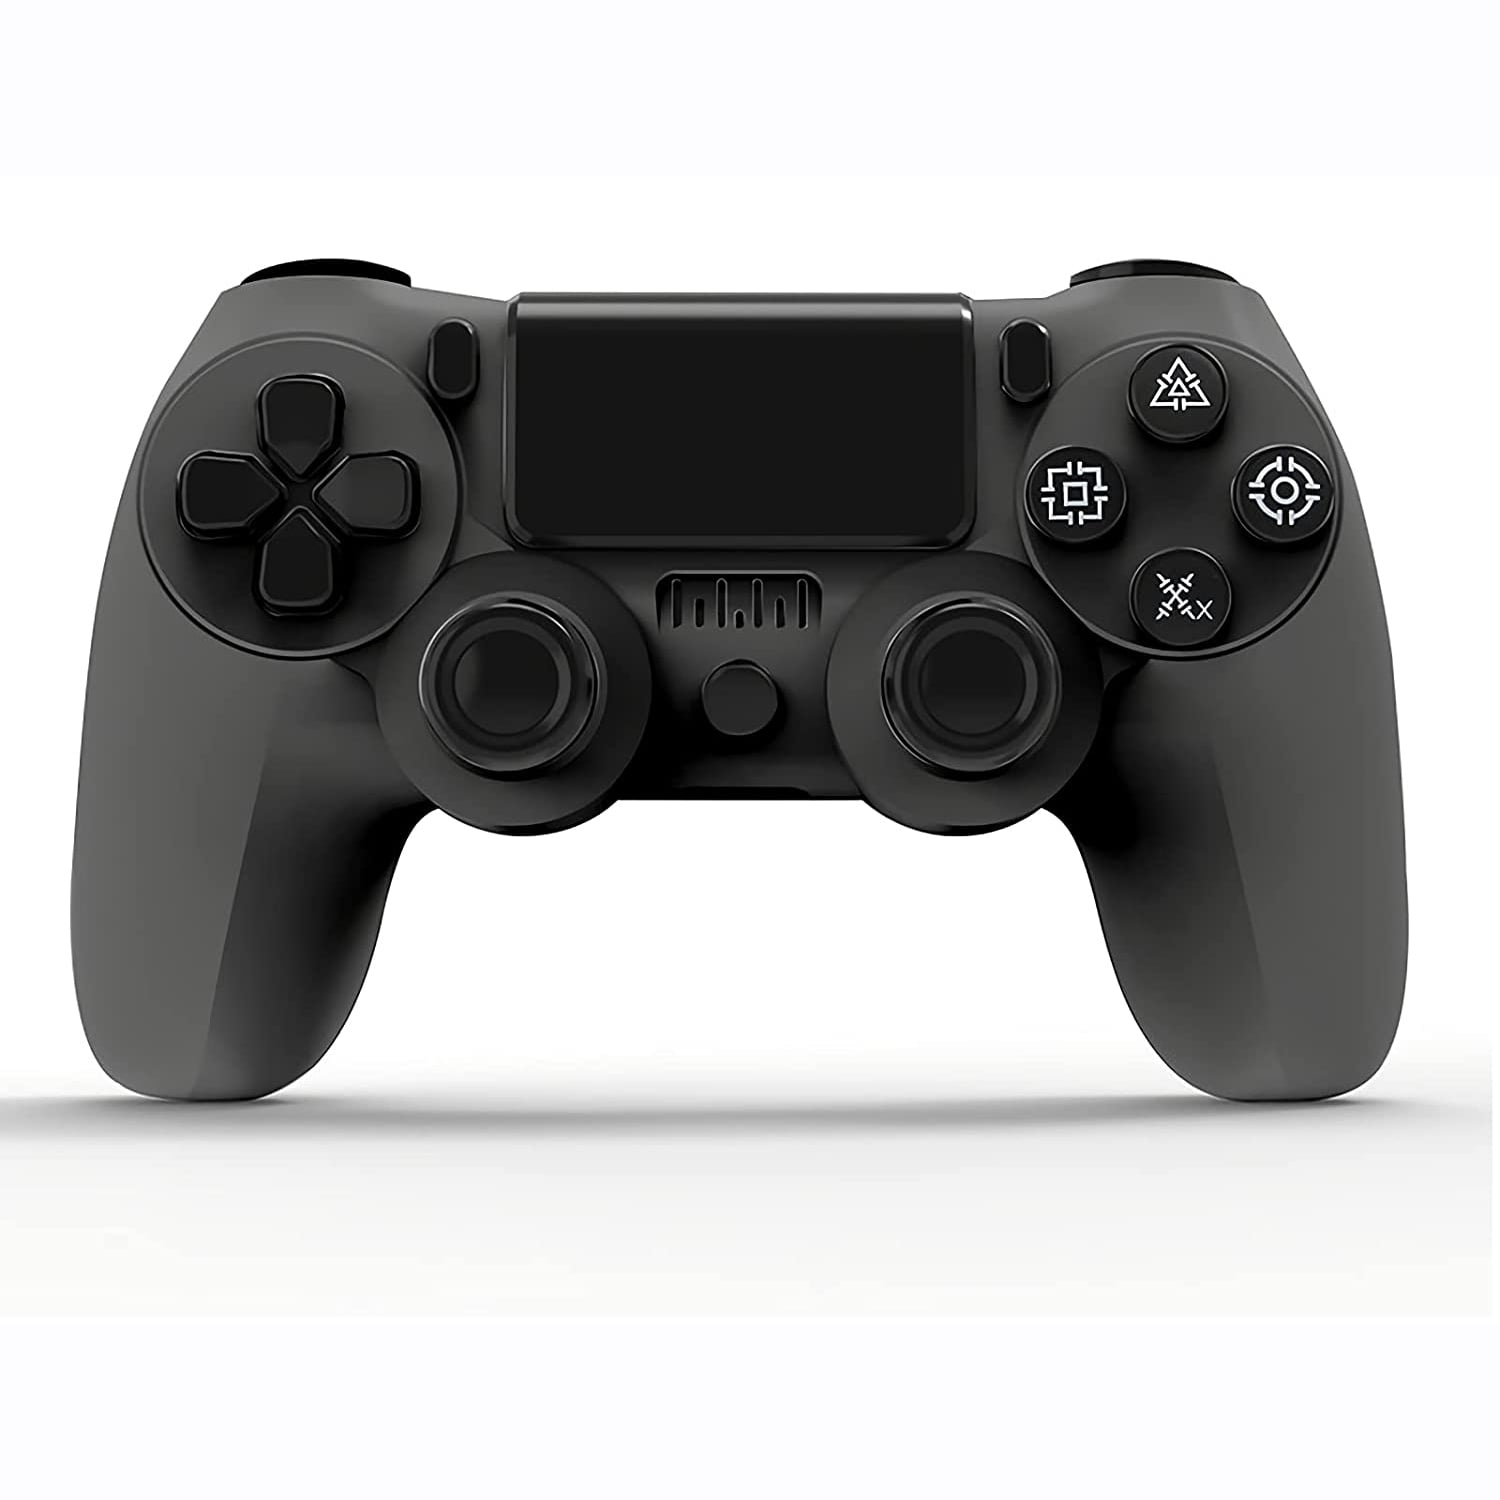 Free: assorted game controllers, Video game Game controller Joystick Online  game, gamepad, game, electronics, playStation 4 png 